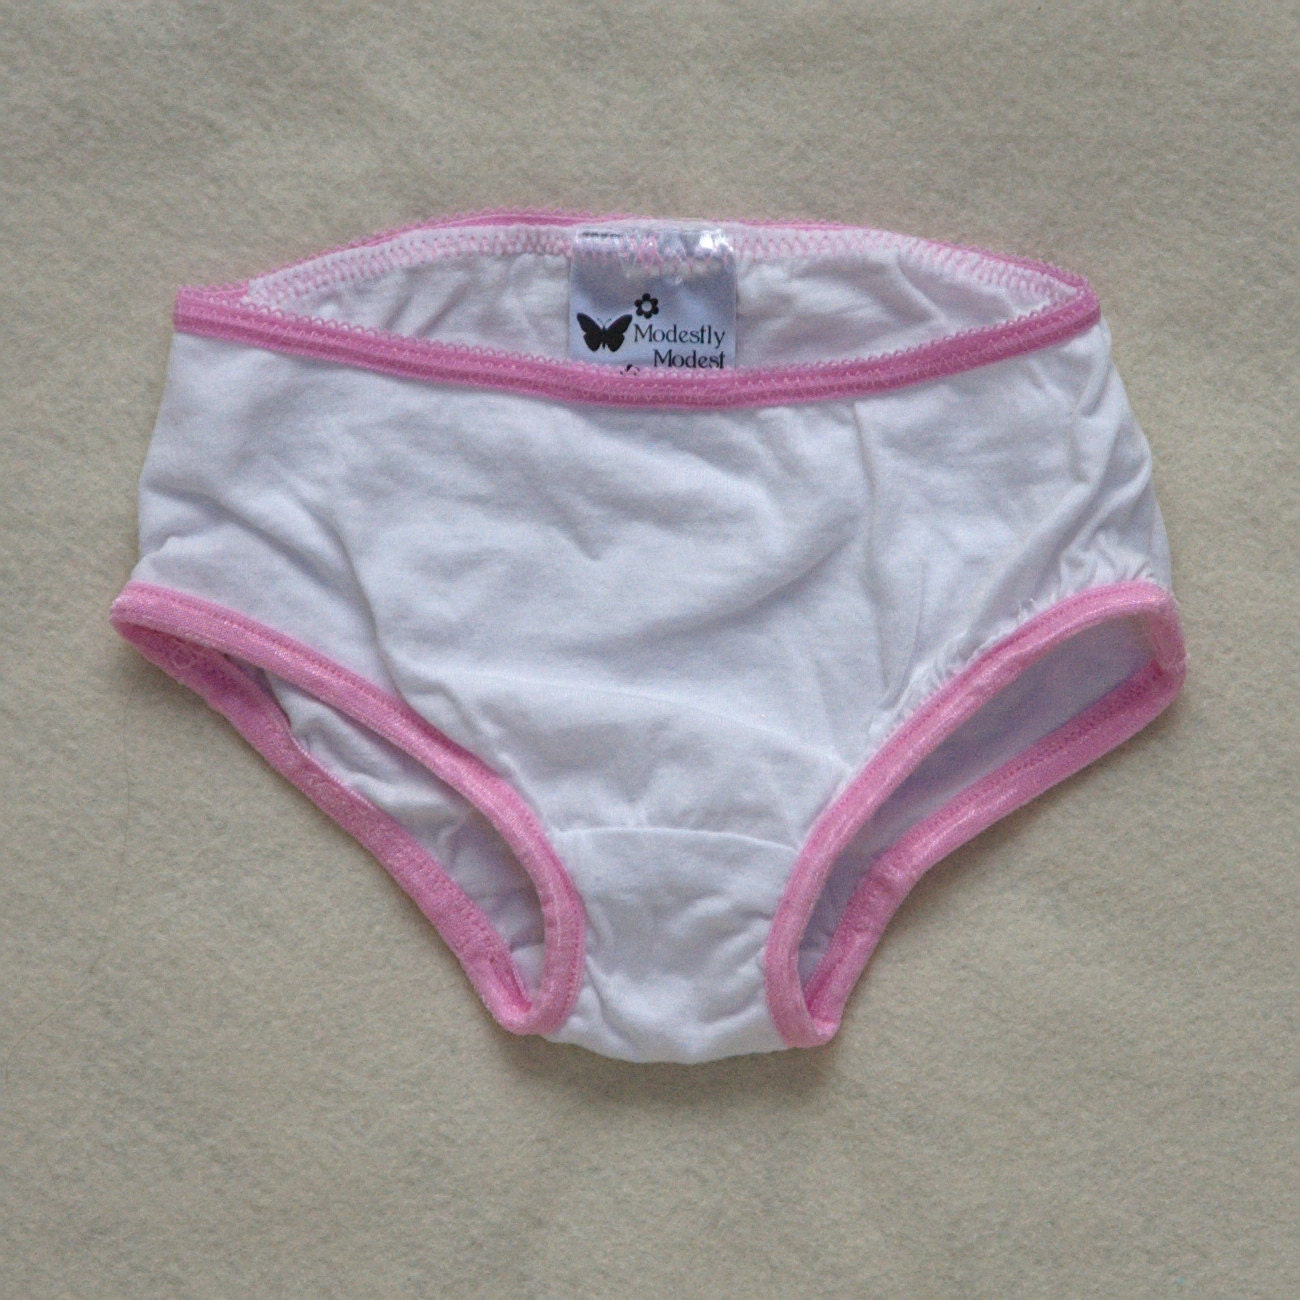 White girl underwear toddler panties EC by ModestlyModest on Etsy